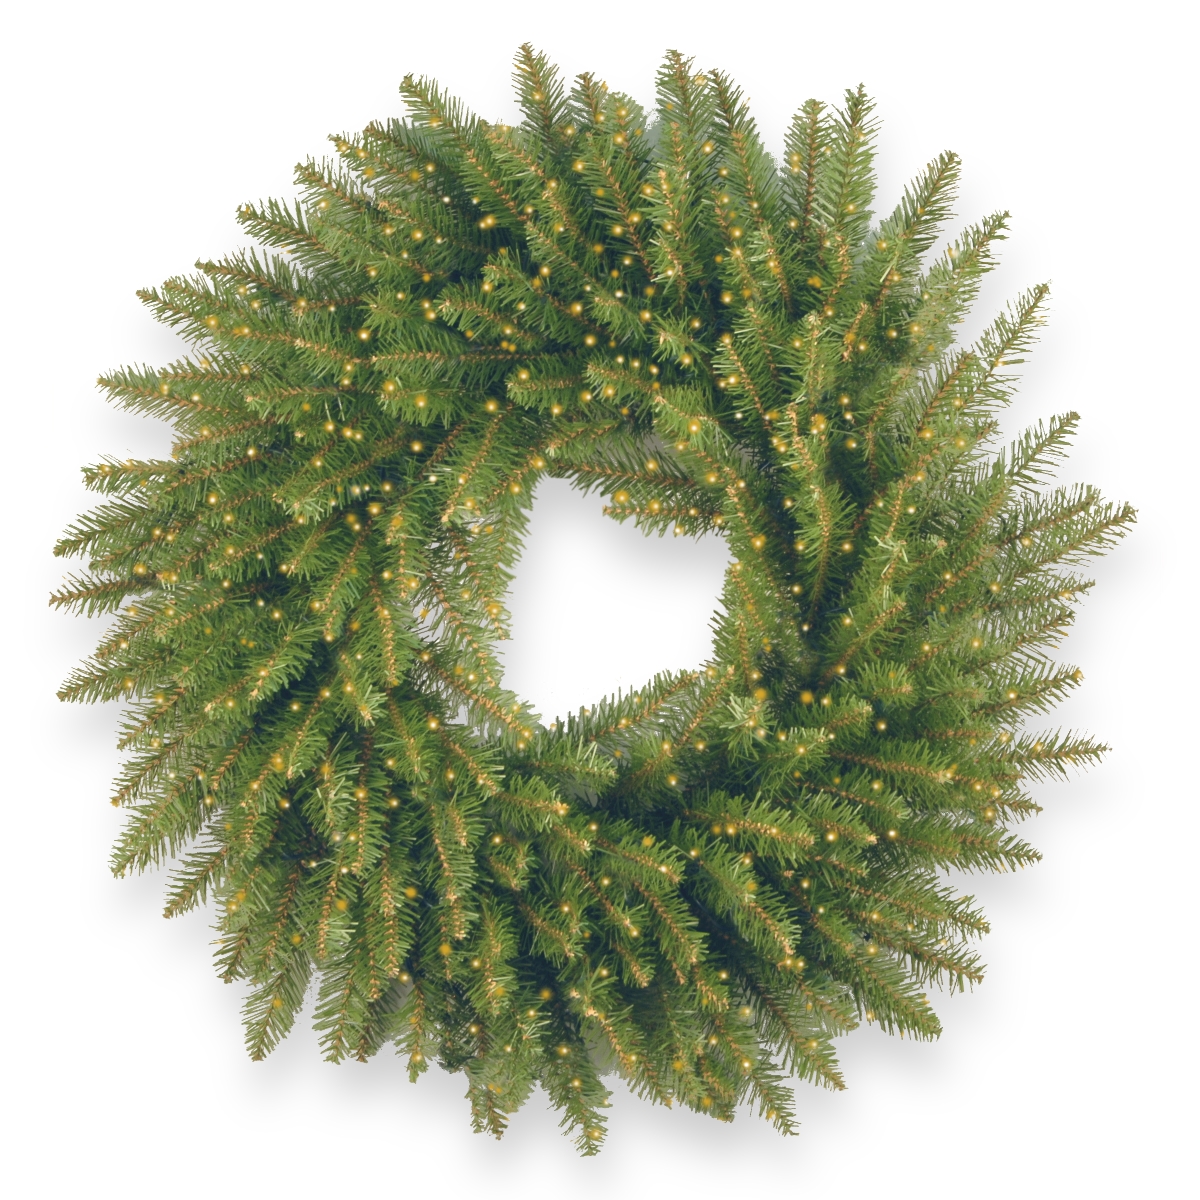 24 In. Kingswood Fir Wreath With 250 Battery Operated Infinity Lights